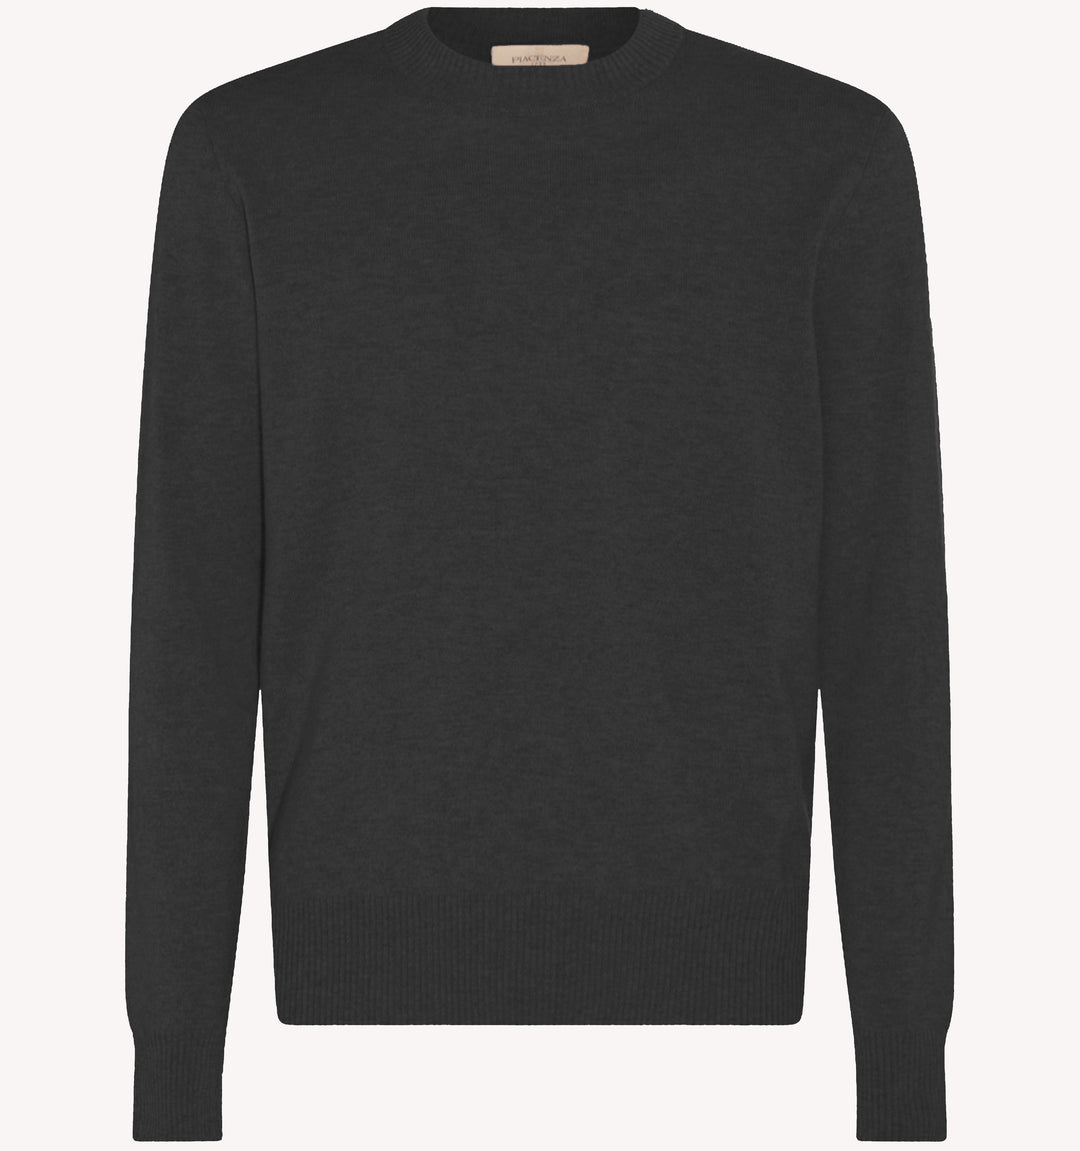 Piacenza Sweater in Charcoal